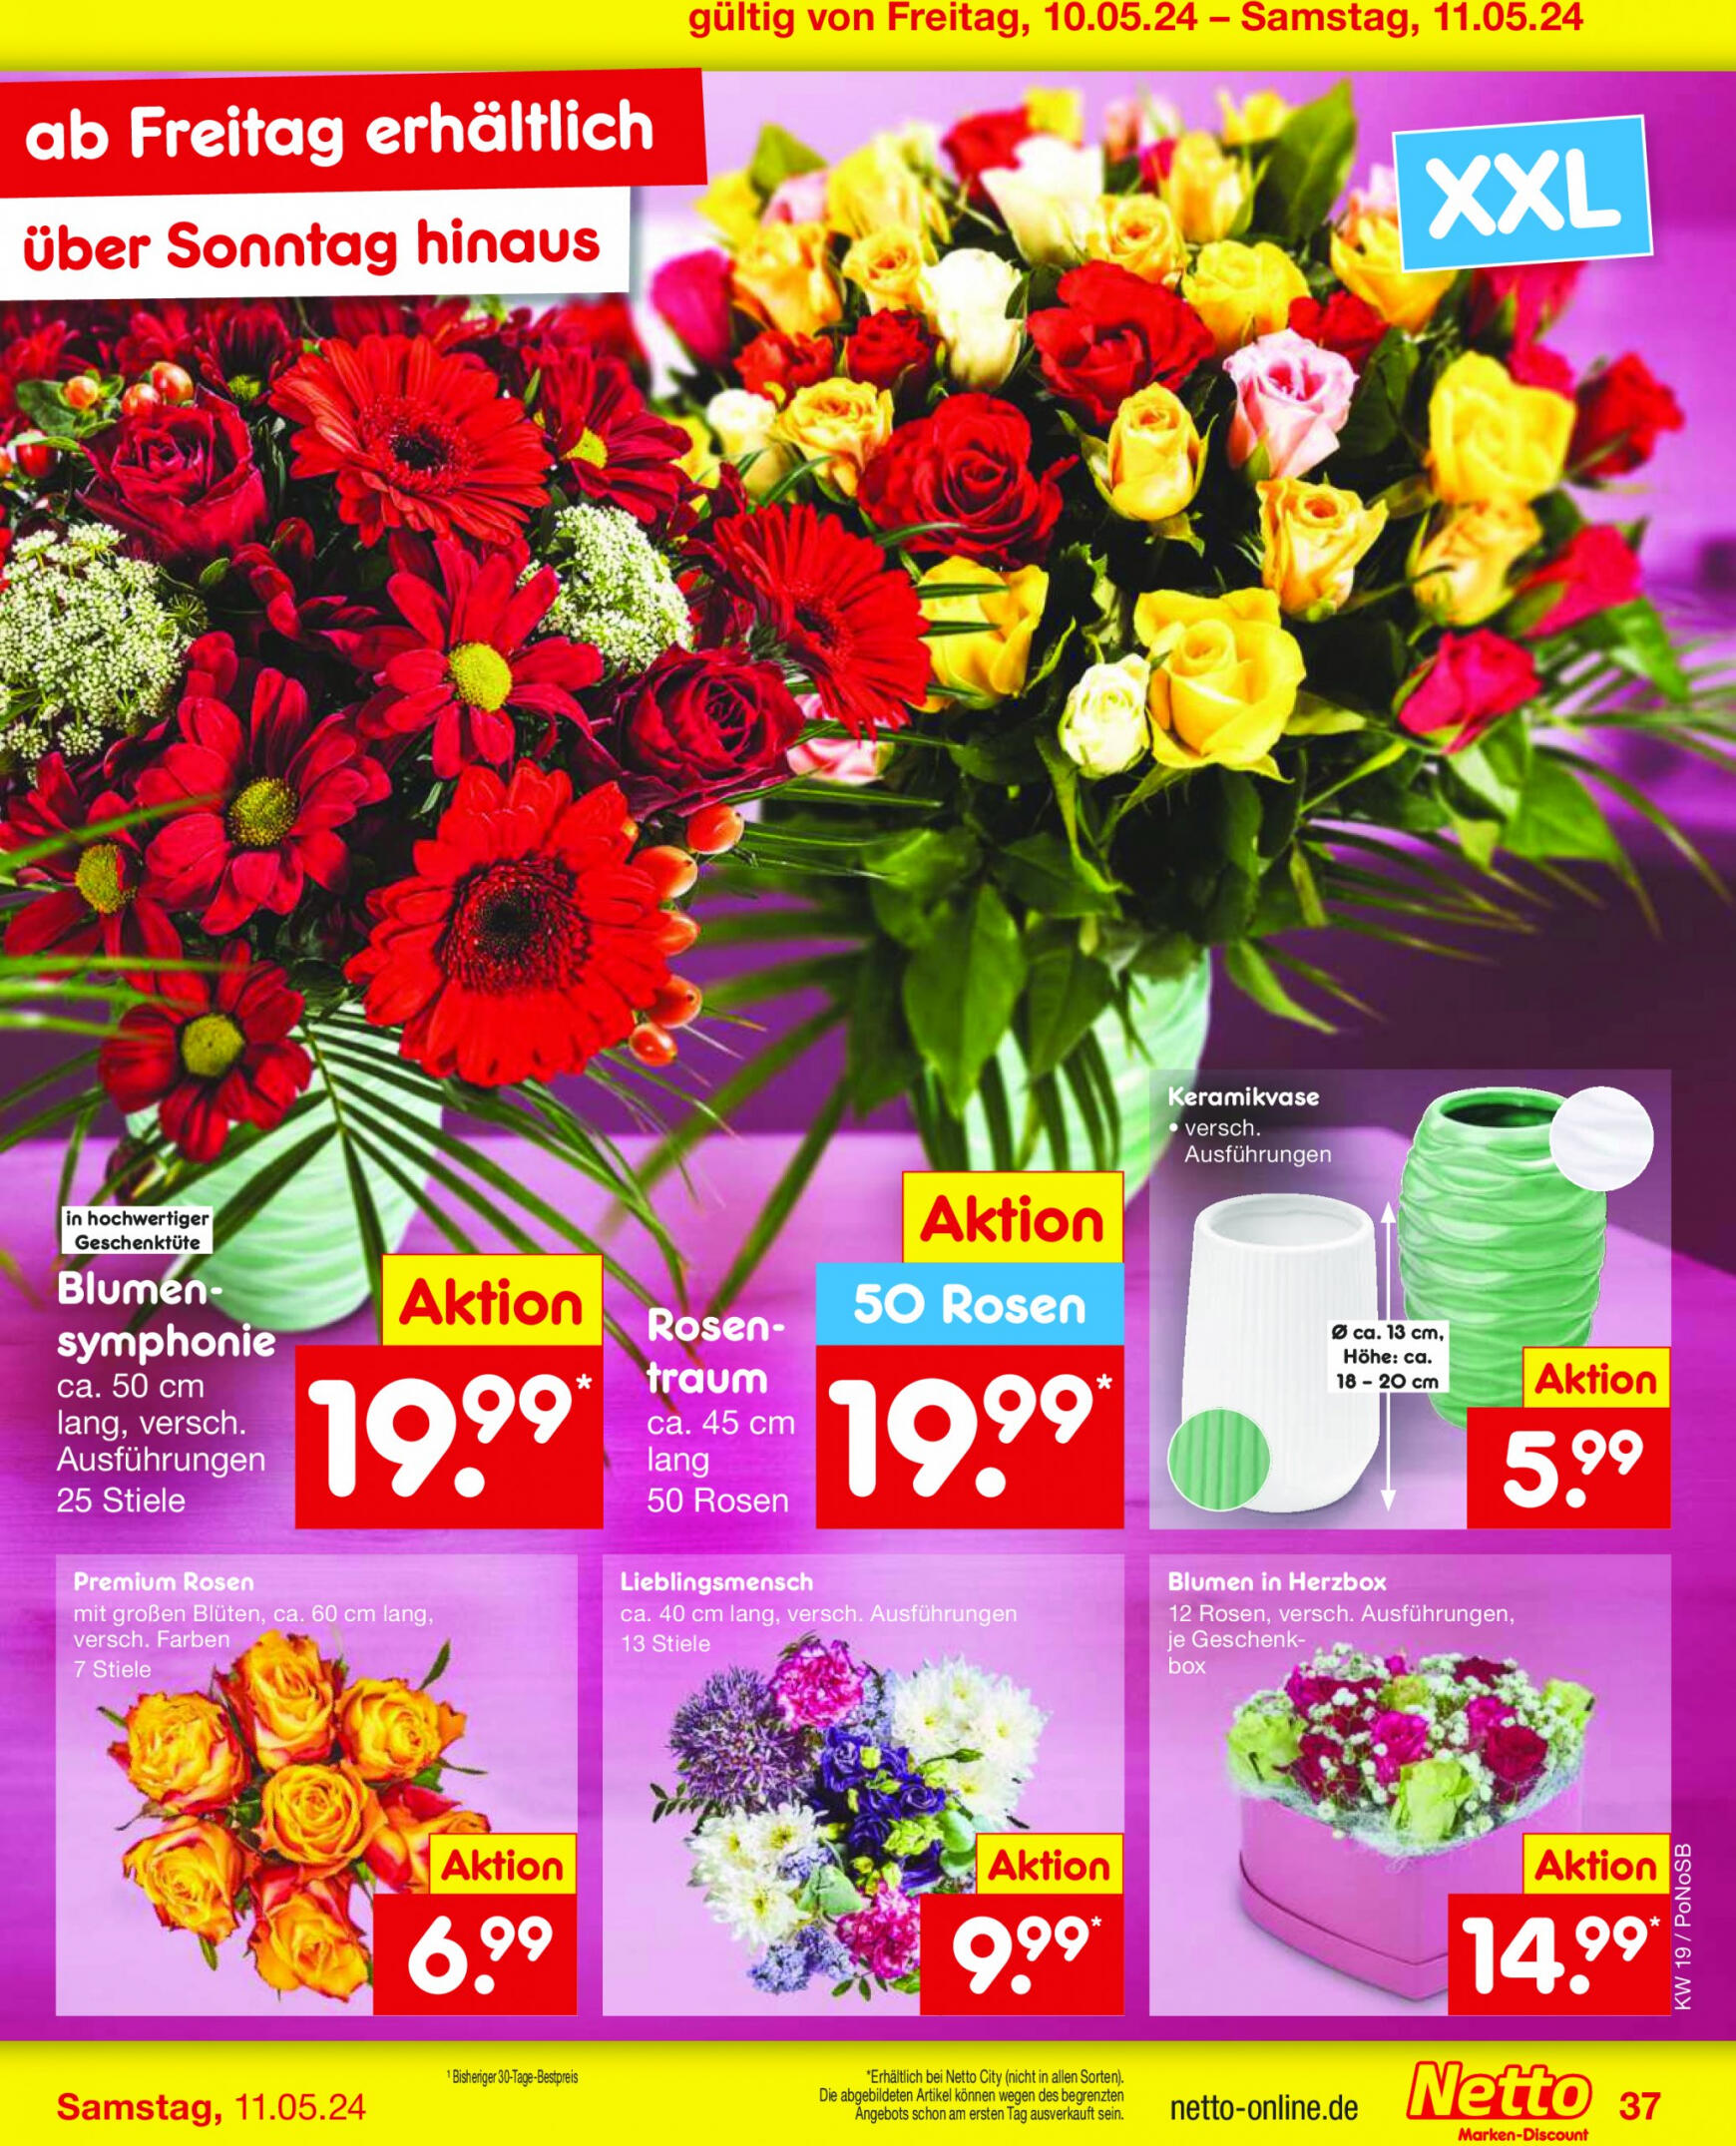 netto - Flyer Netto aktuell 06.05. - 11.05. - page: 47